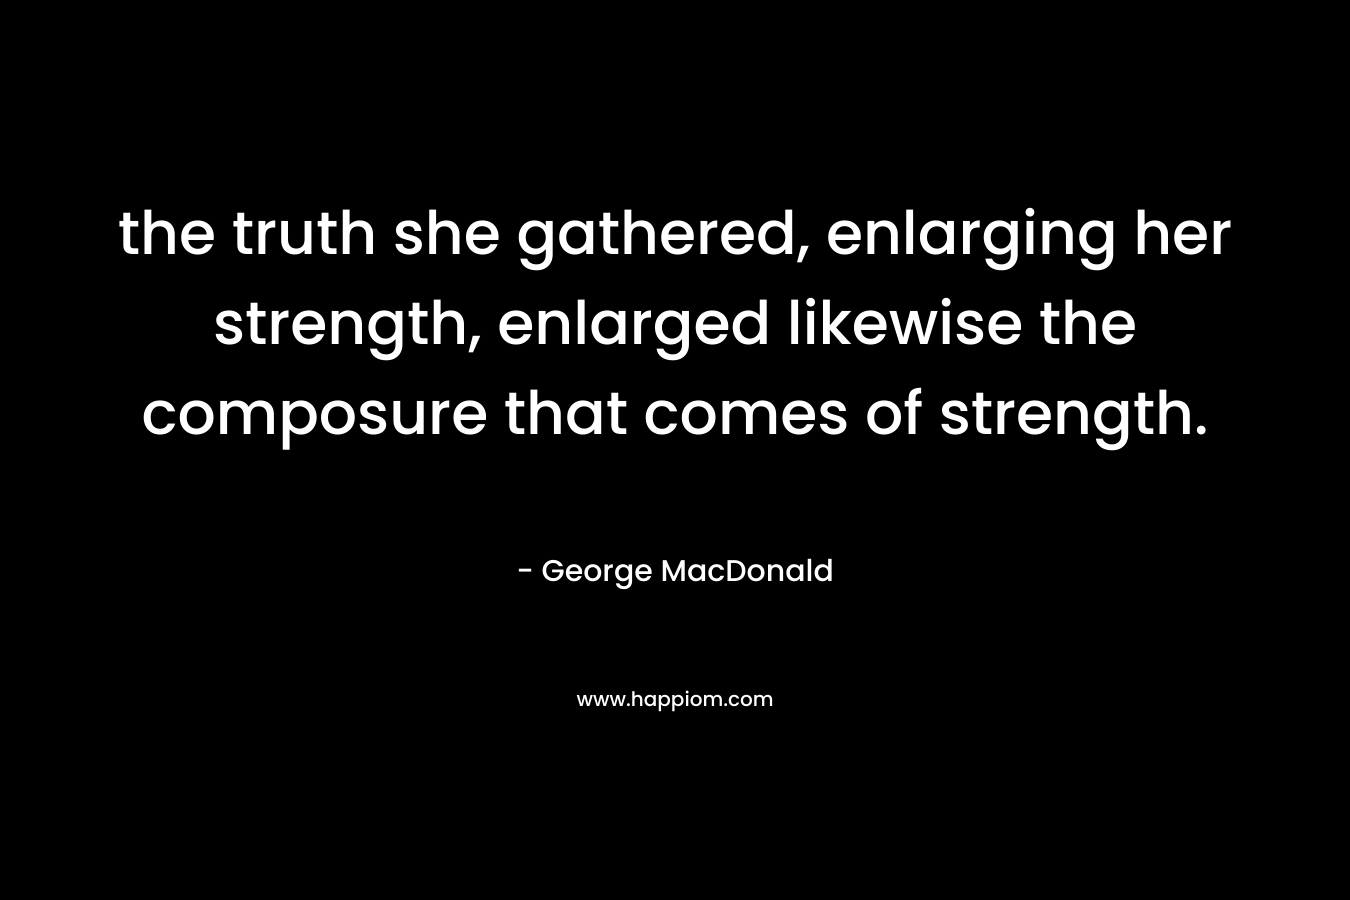 the truth she gathered, enlarging her strength, enlarged likewise the composure that comes of strength. – George MacDonald